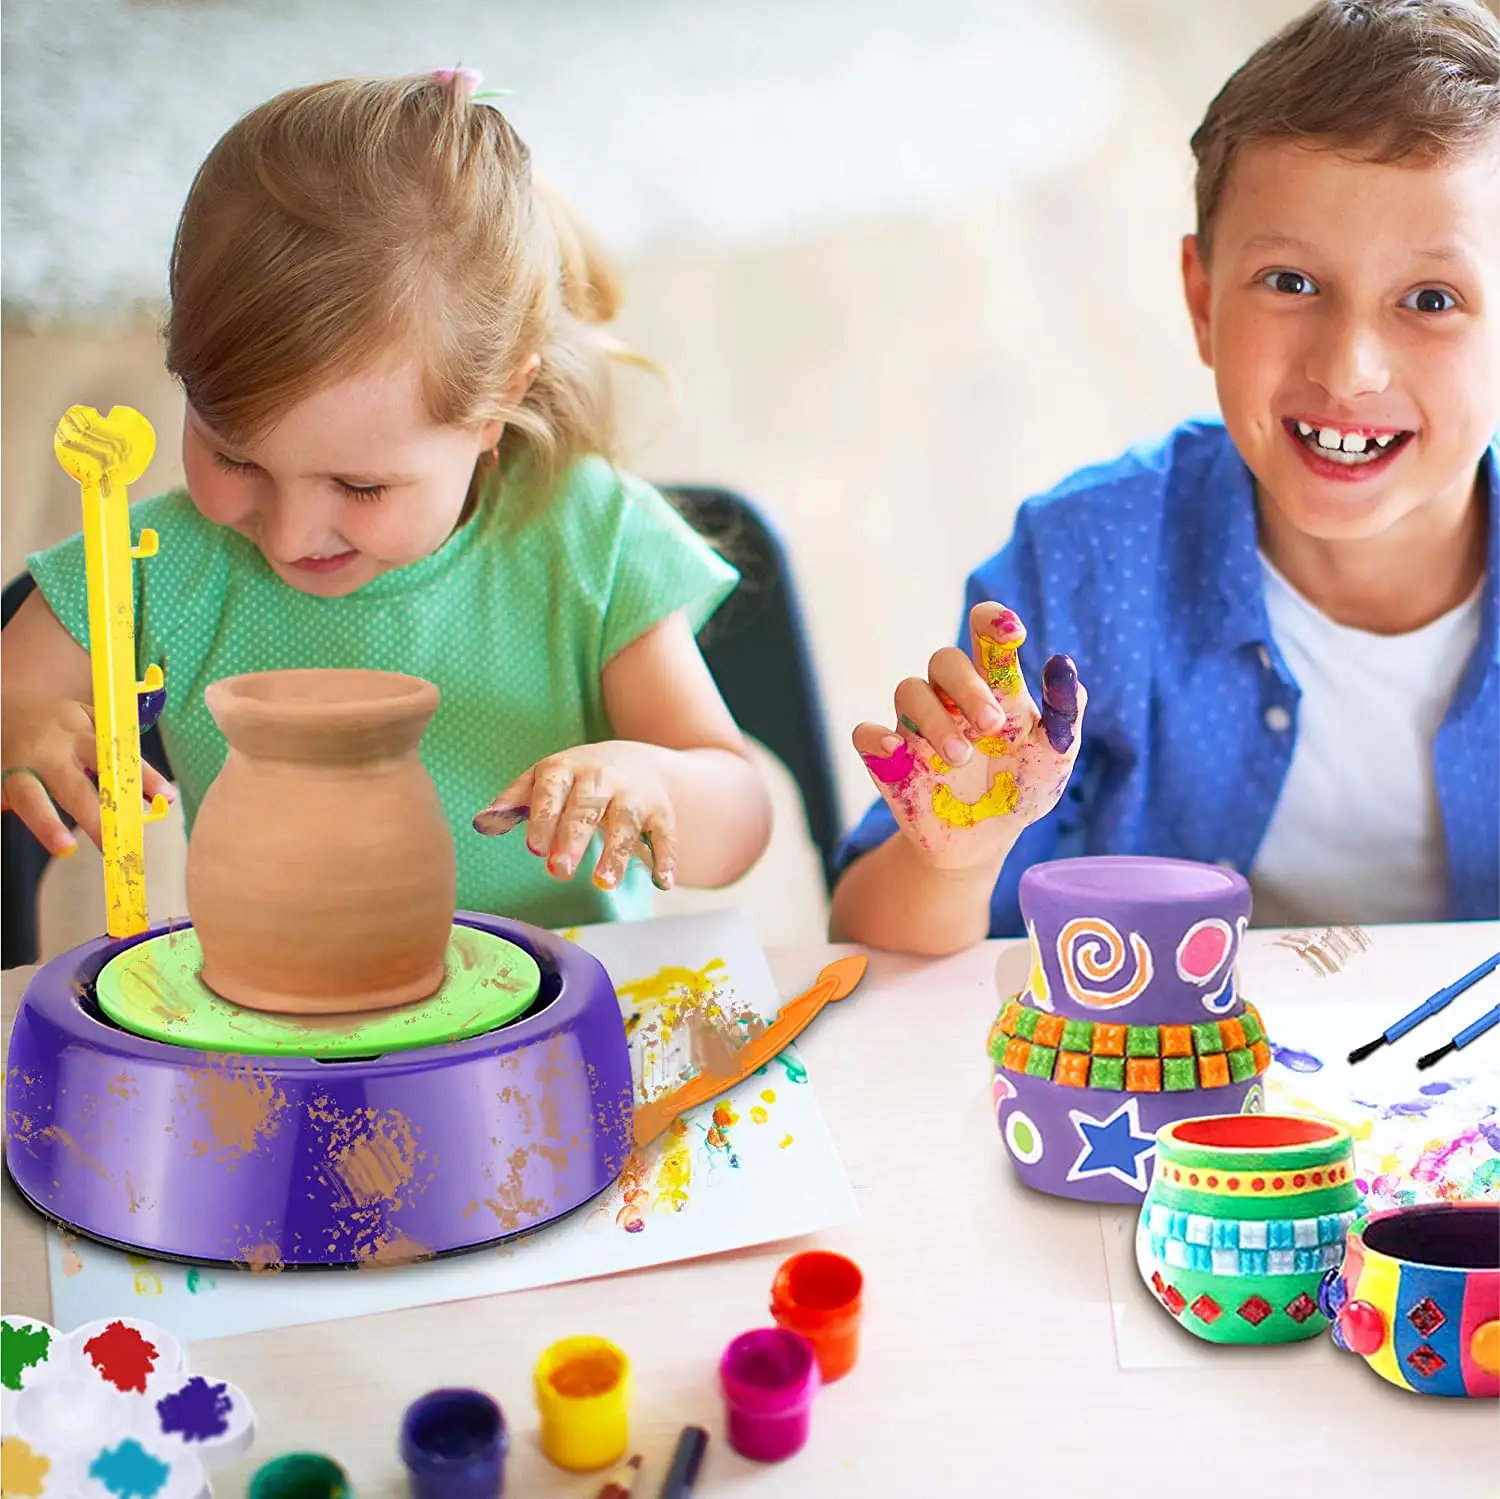 New Product Kids Toys mit 2 Clay Electric Ceramic Wheel Machine für <span class=keywords><strong>DIY</strong></span> Air Dry Sculpting Clay,Craft Paint Kit und Educational